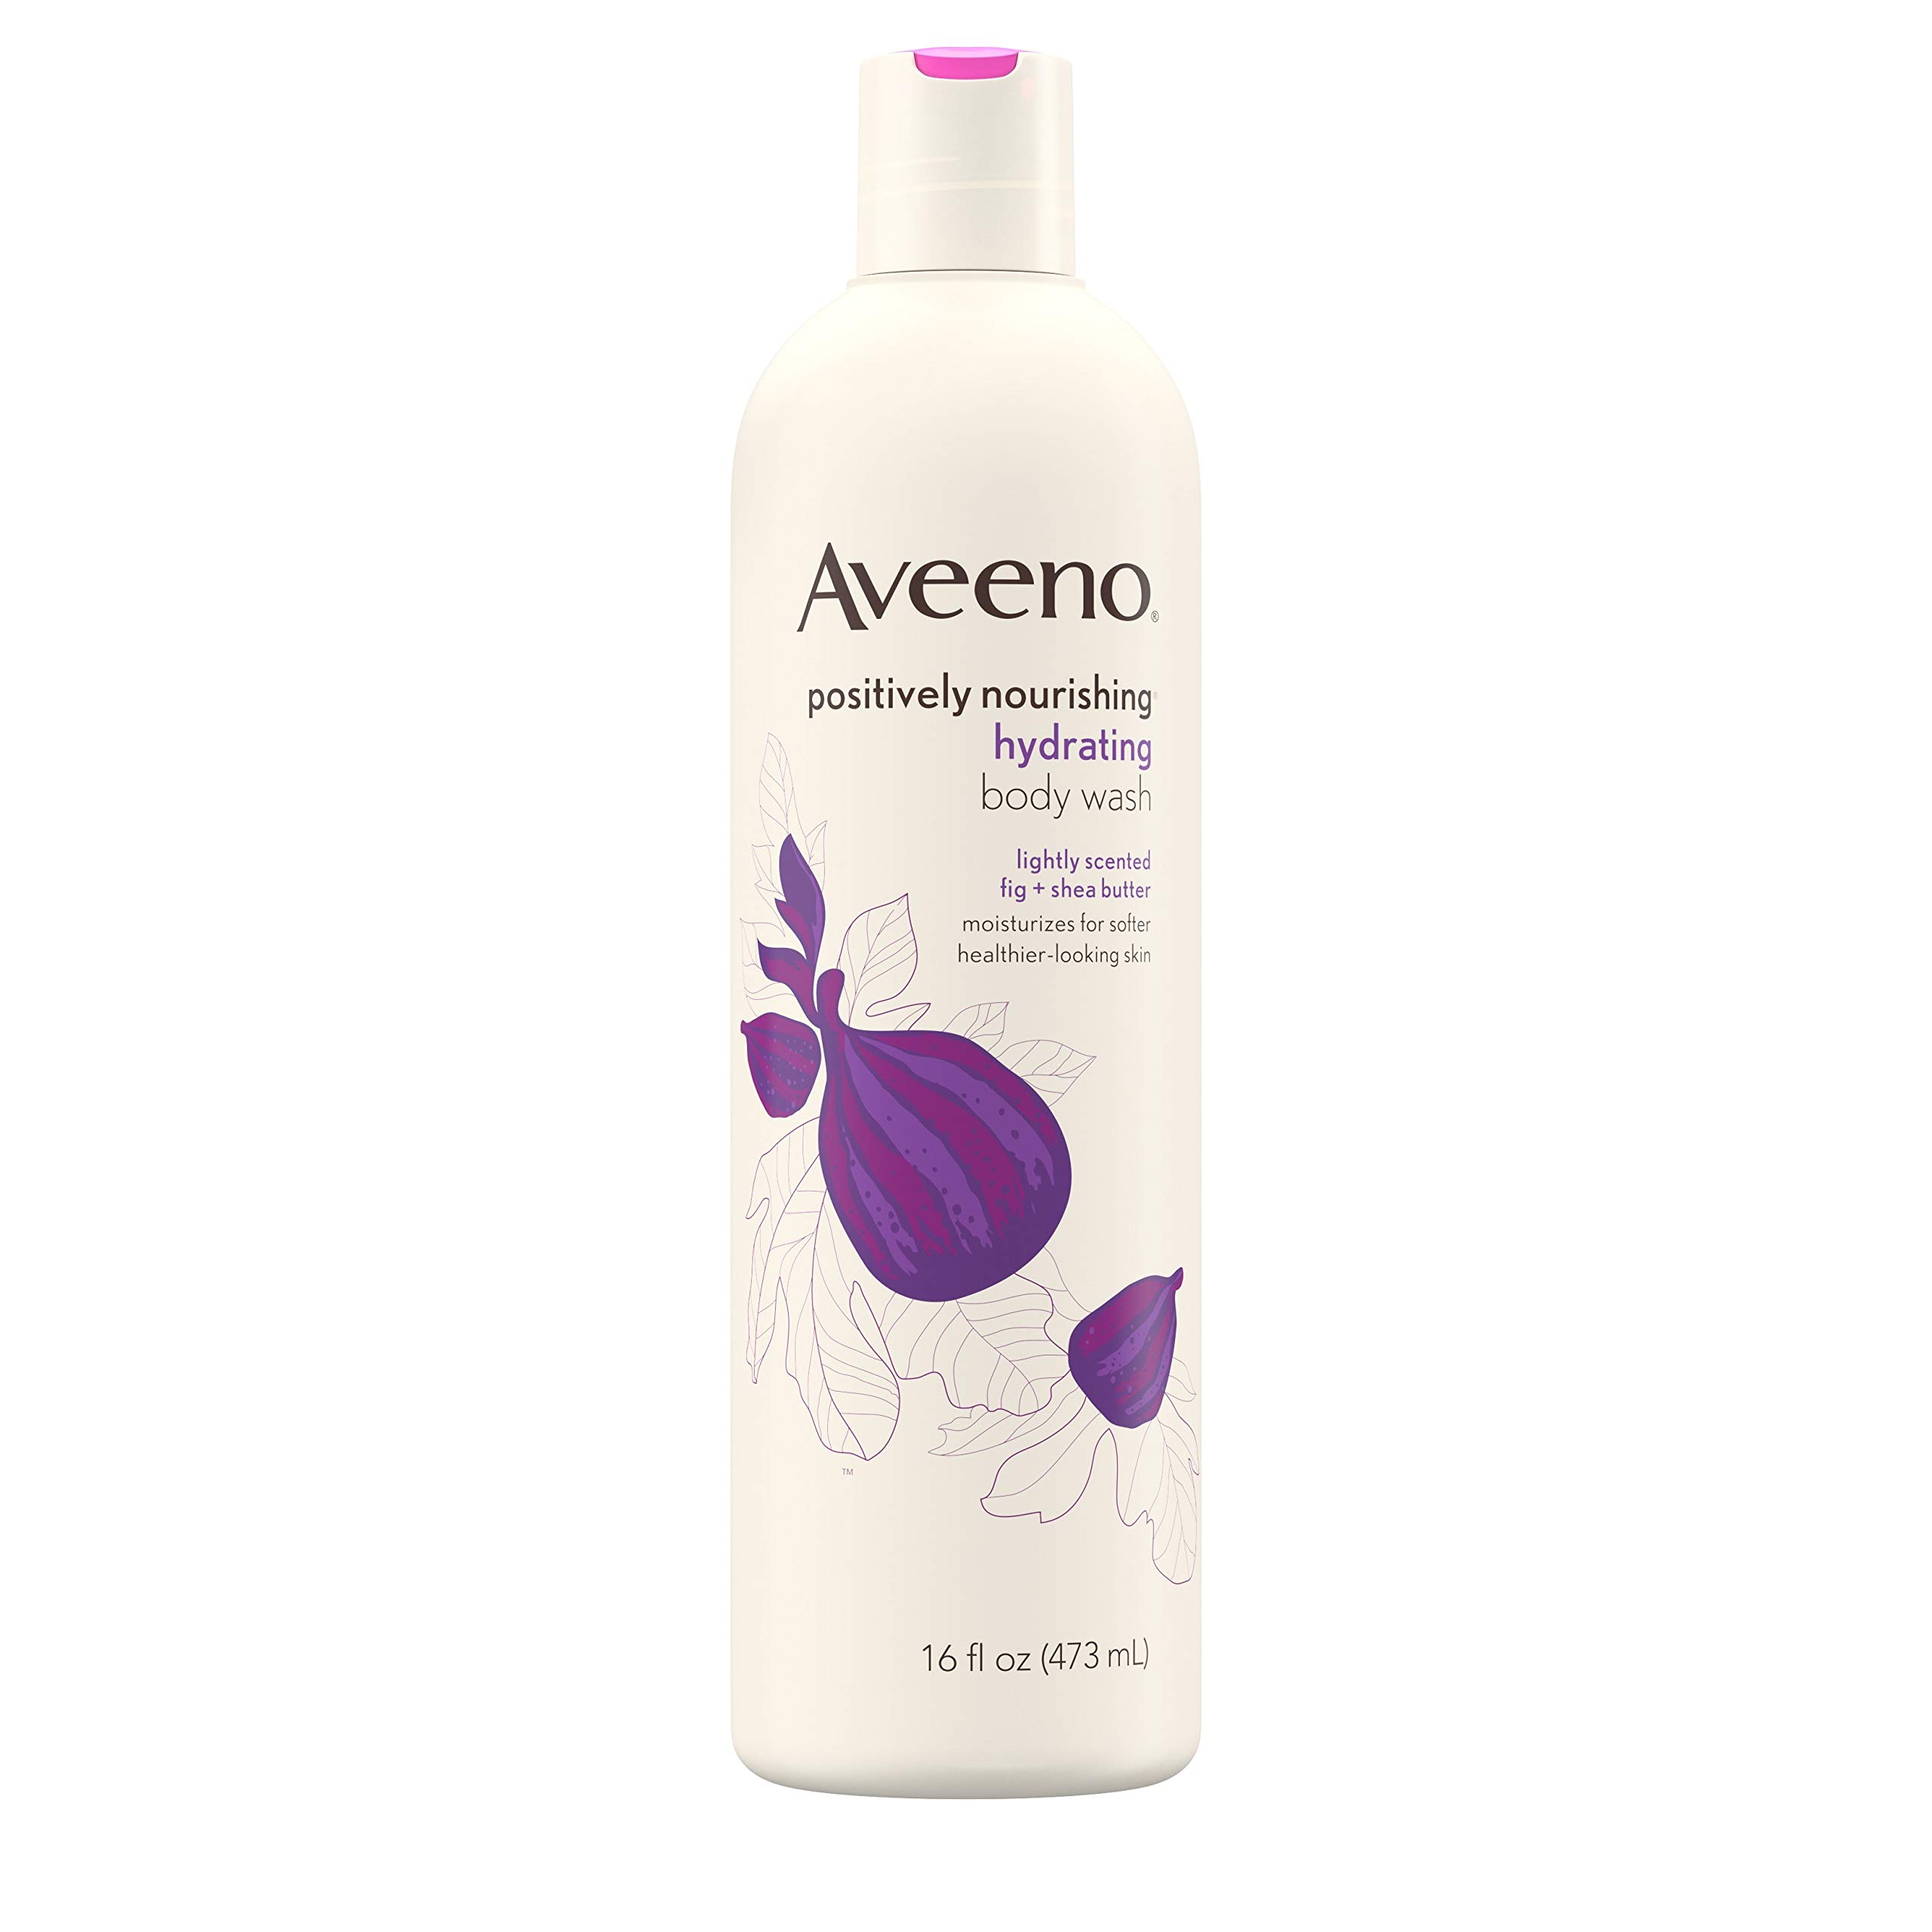 Aveeno Positively Nourishing Hydrating Body Wash for Dry Skin with Natural Fig & Shea Butter, Lightly Scented Daily Moisturizing Body Wash, 16 fl. oz